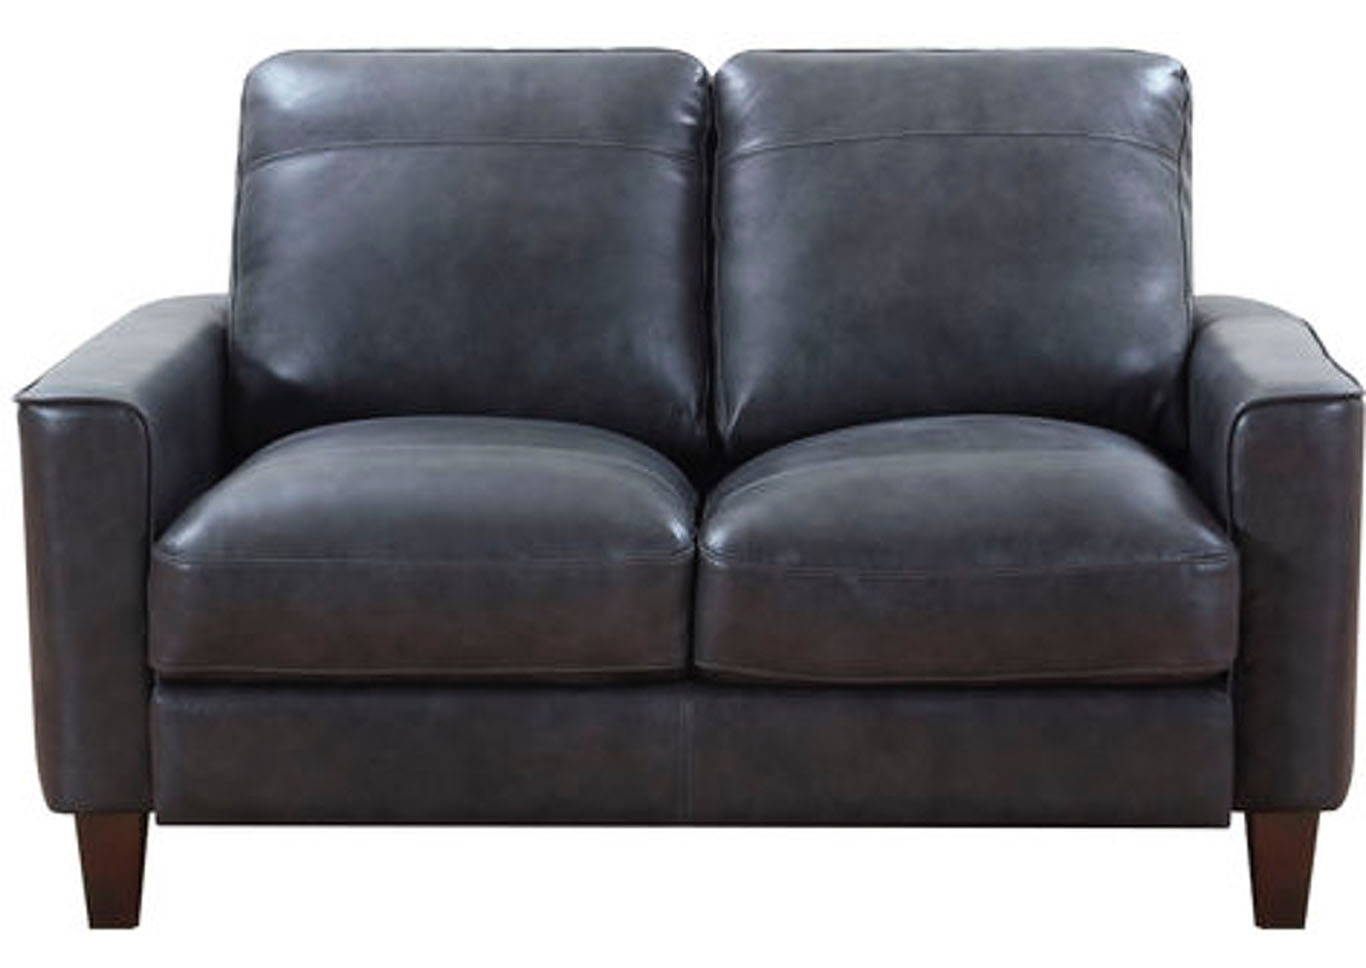 Chino Top Grain Leather Sofa and Love Seat - Gray,Instore